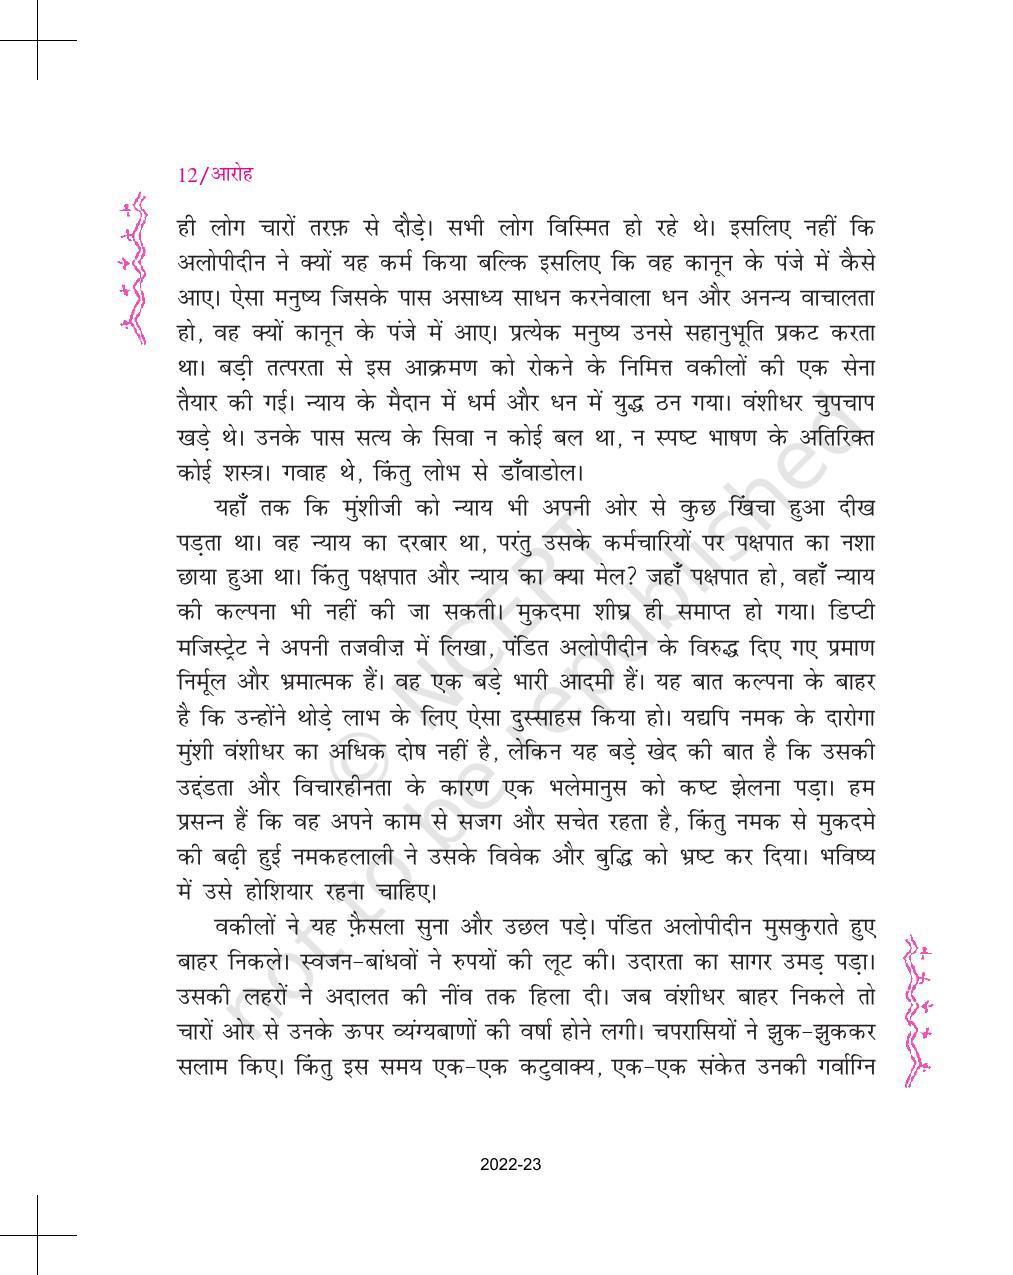 NCERT Book for Class 11 Hindi Aroh Chapter 1 नमक का दारोगा - Page 12